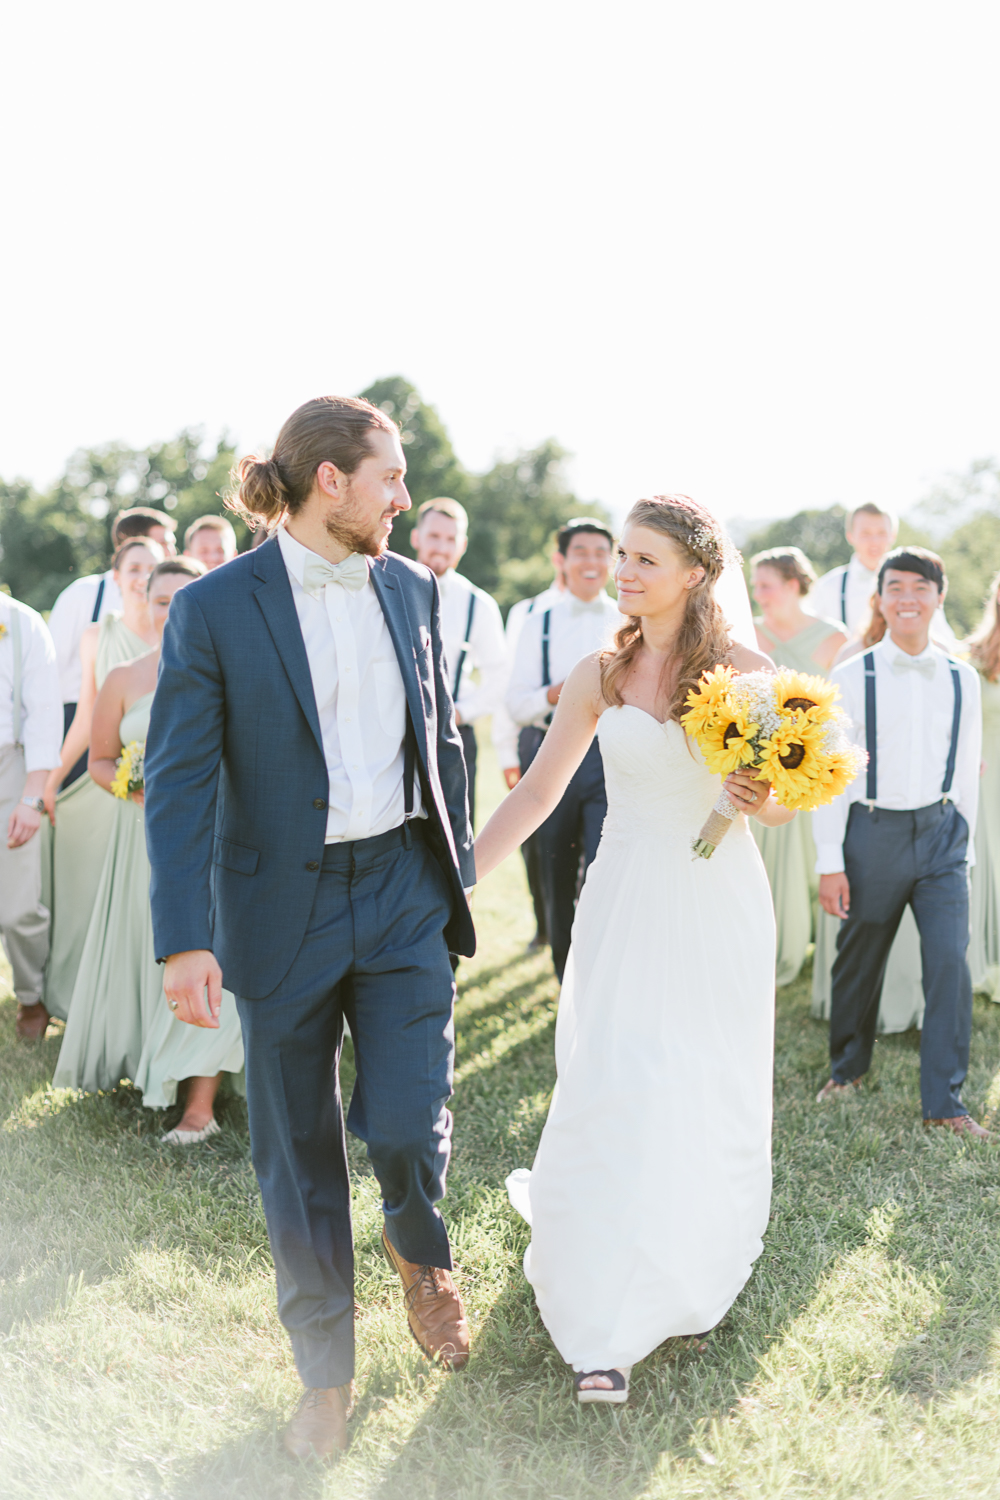 Wedding Photographer's 3 Biggest Regrets from Our Wedding Day - Hunter and Sarah Photography